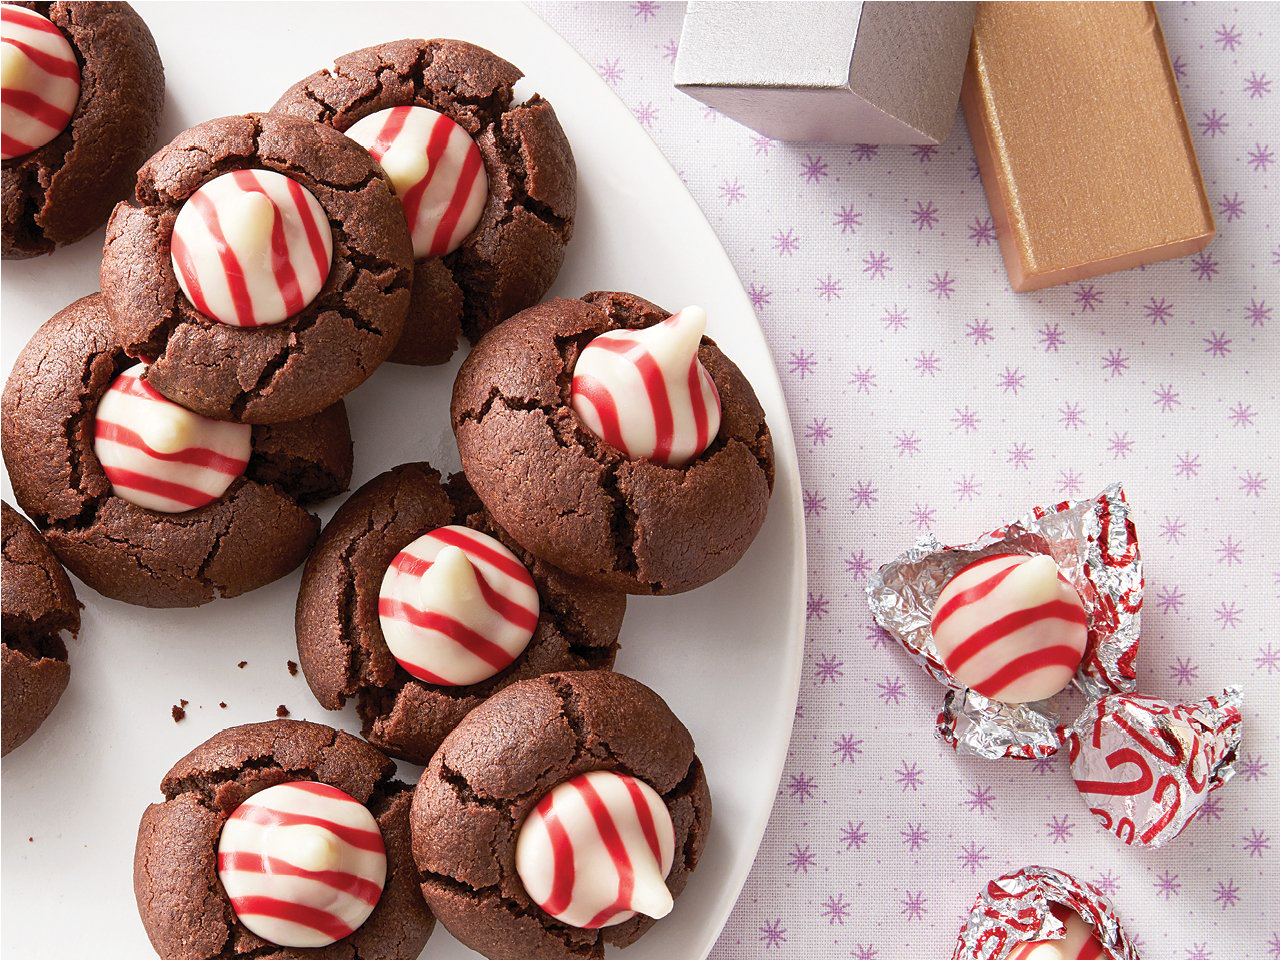 Chocolate-mint candy cane thumbprint cookies